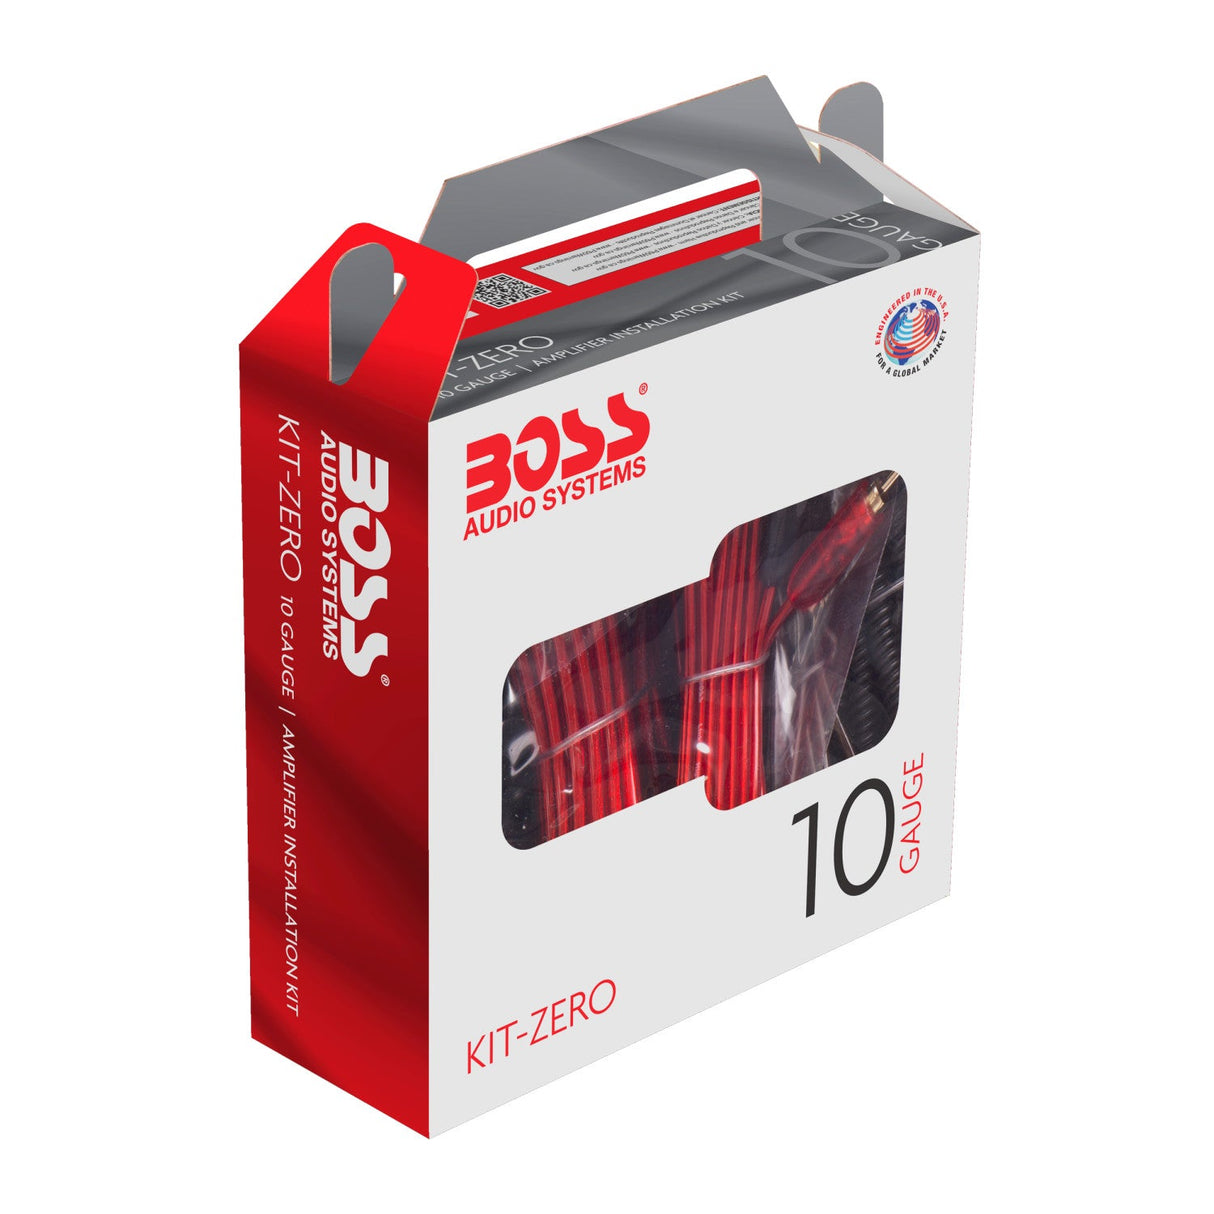 Boss Audio 10 Gauge Amplifier Installation Kit with RCA Interconnect Wire